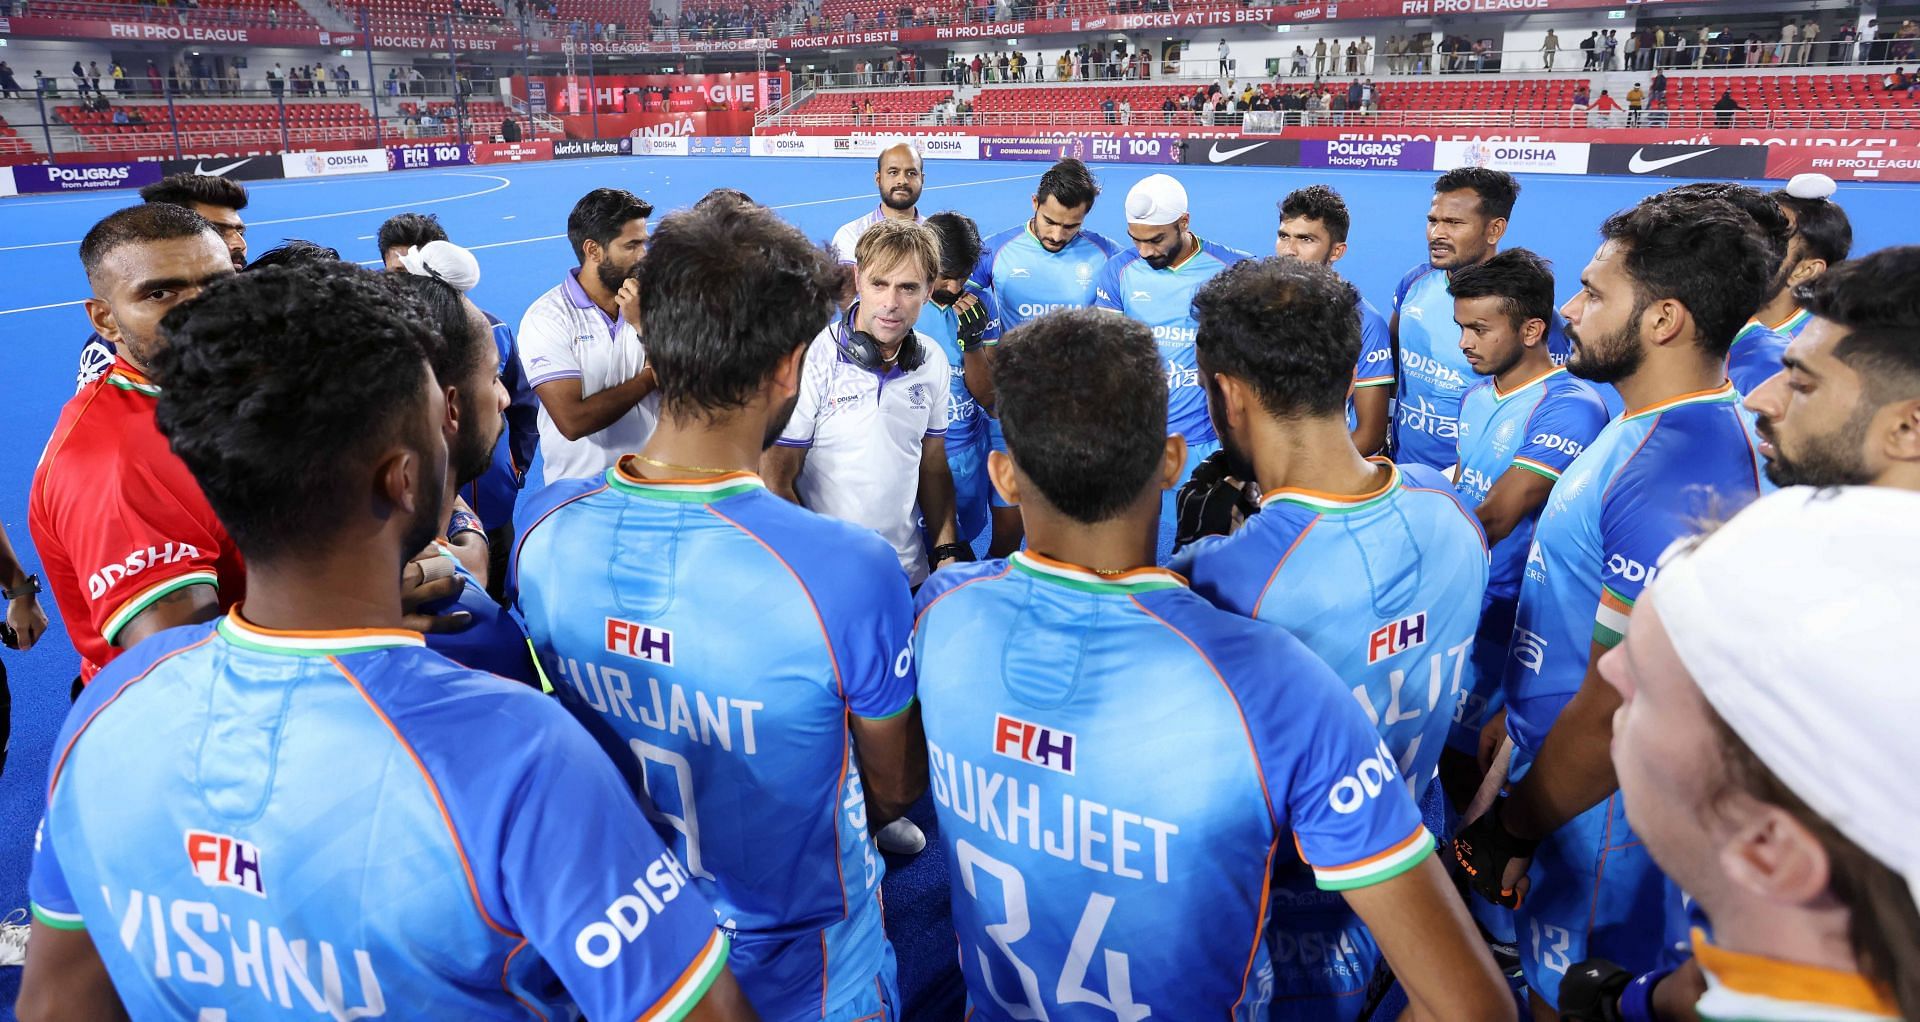 India are set to play a 5-Test series in Australia against the Kookaburras